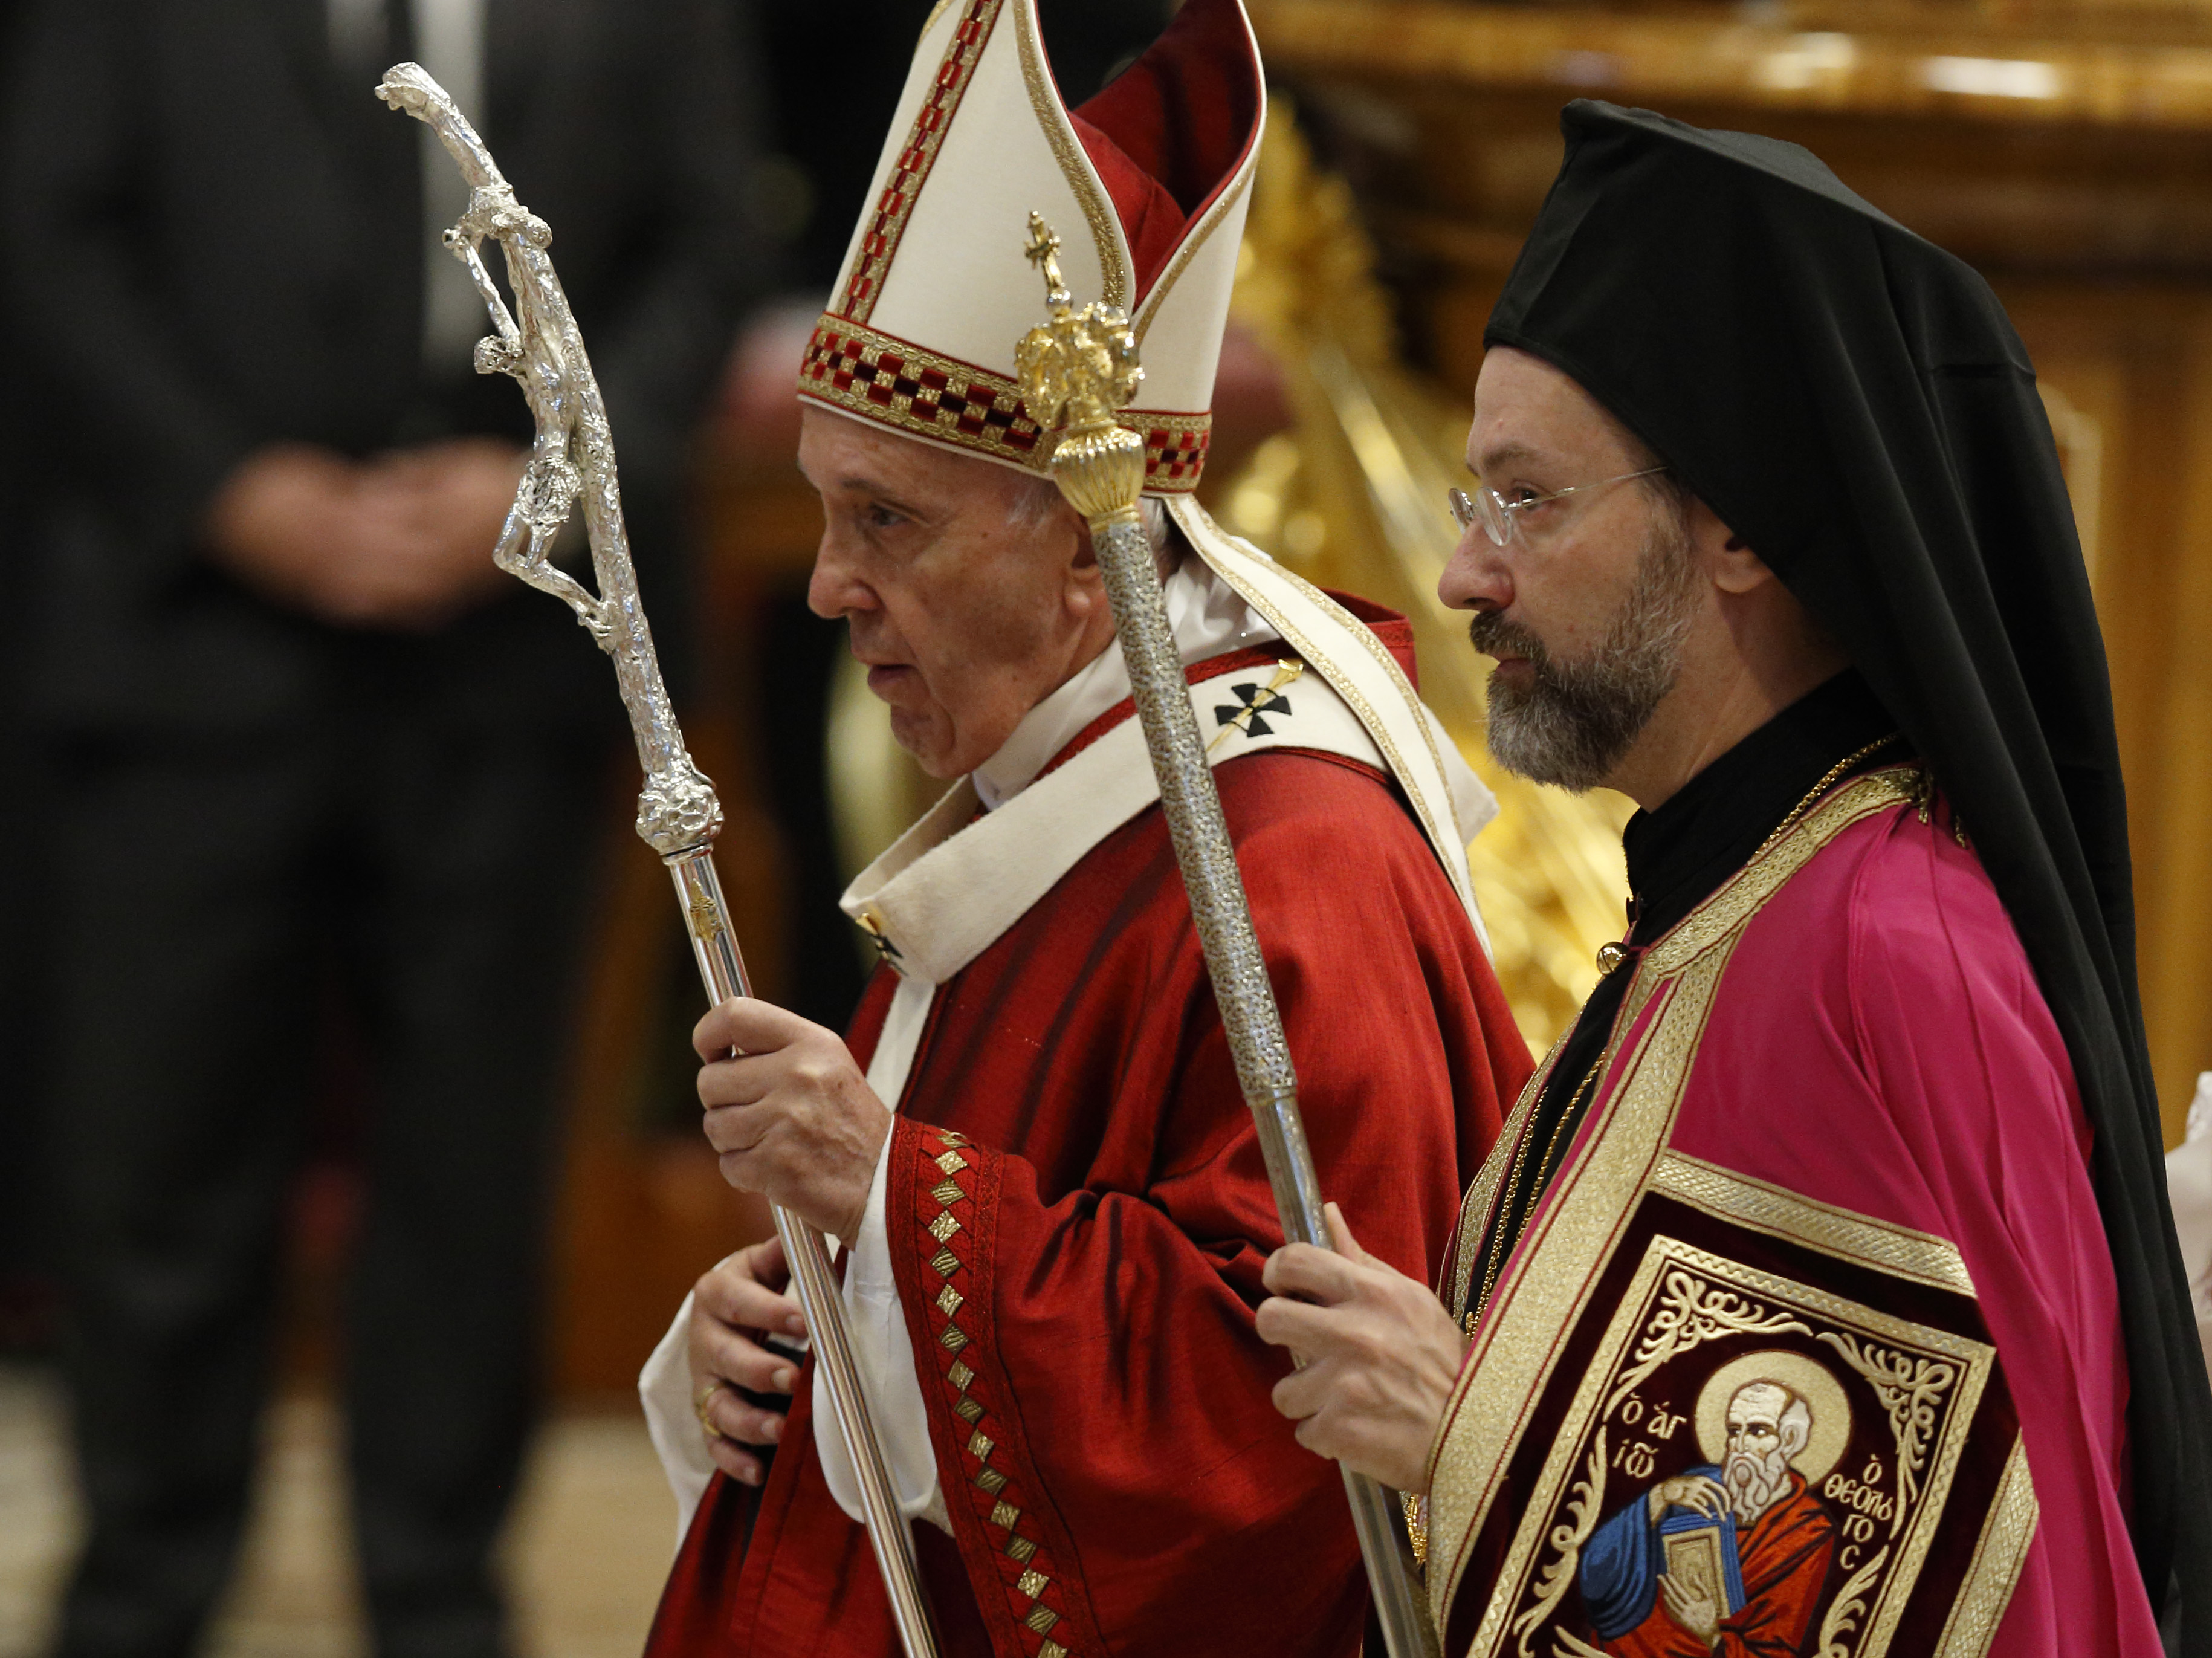 Pope wanted apostles' relics united to encourage Christian unity